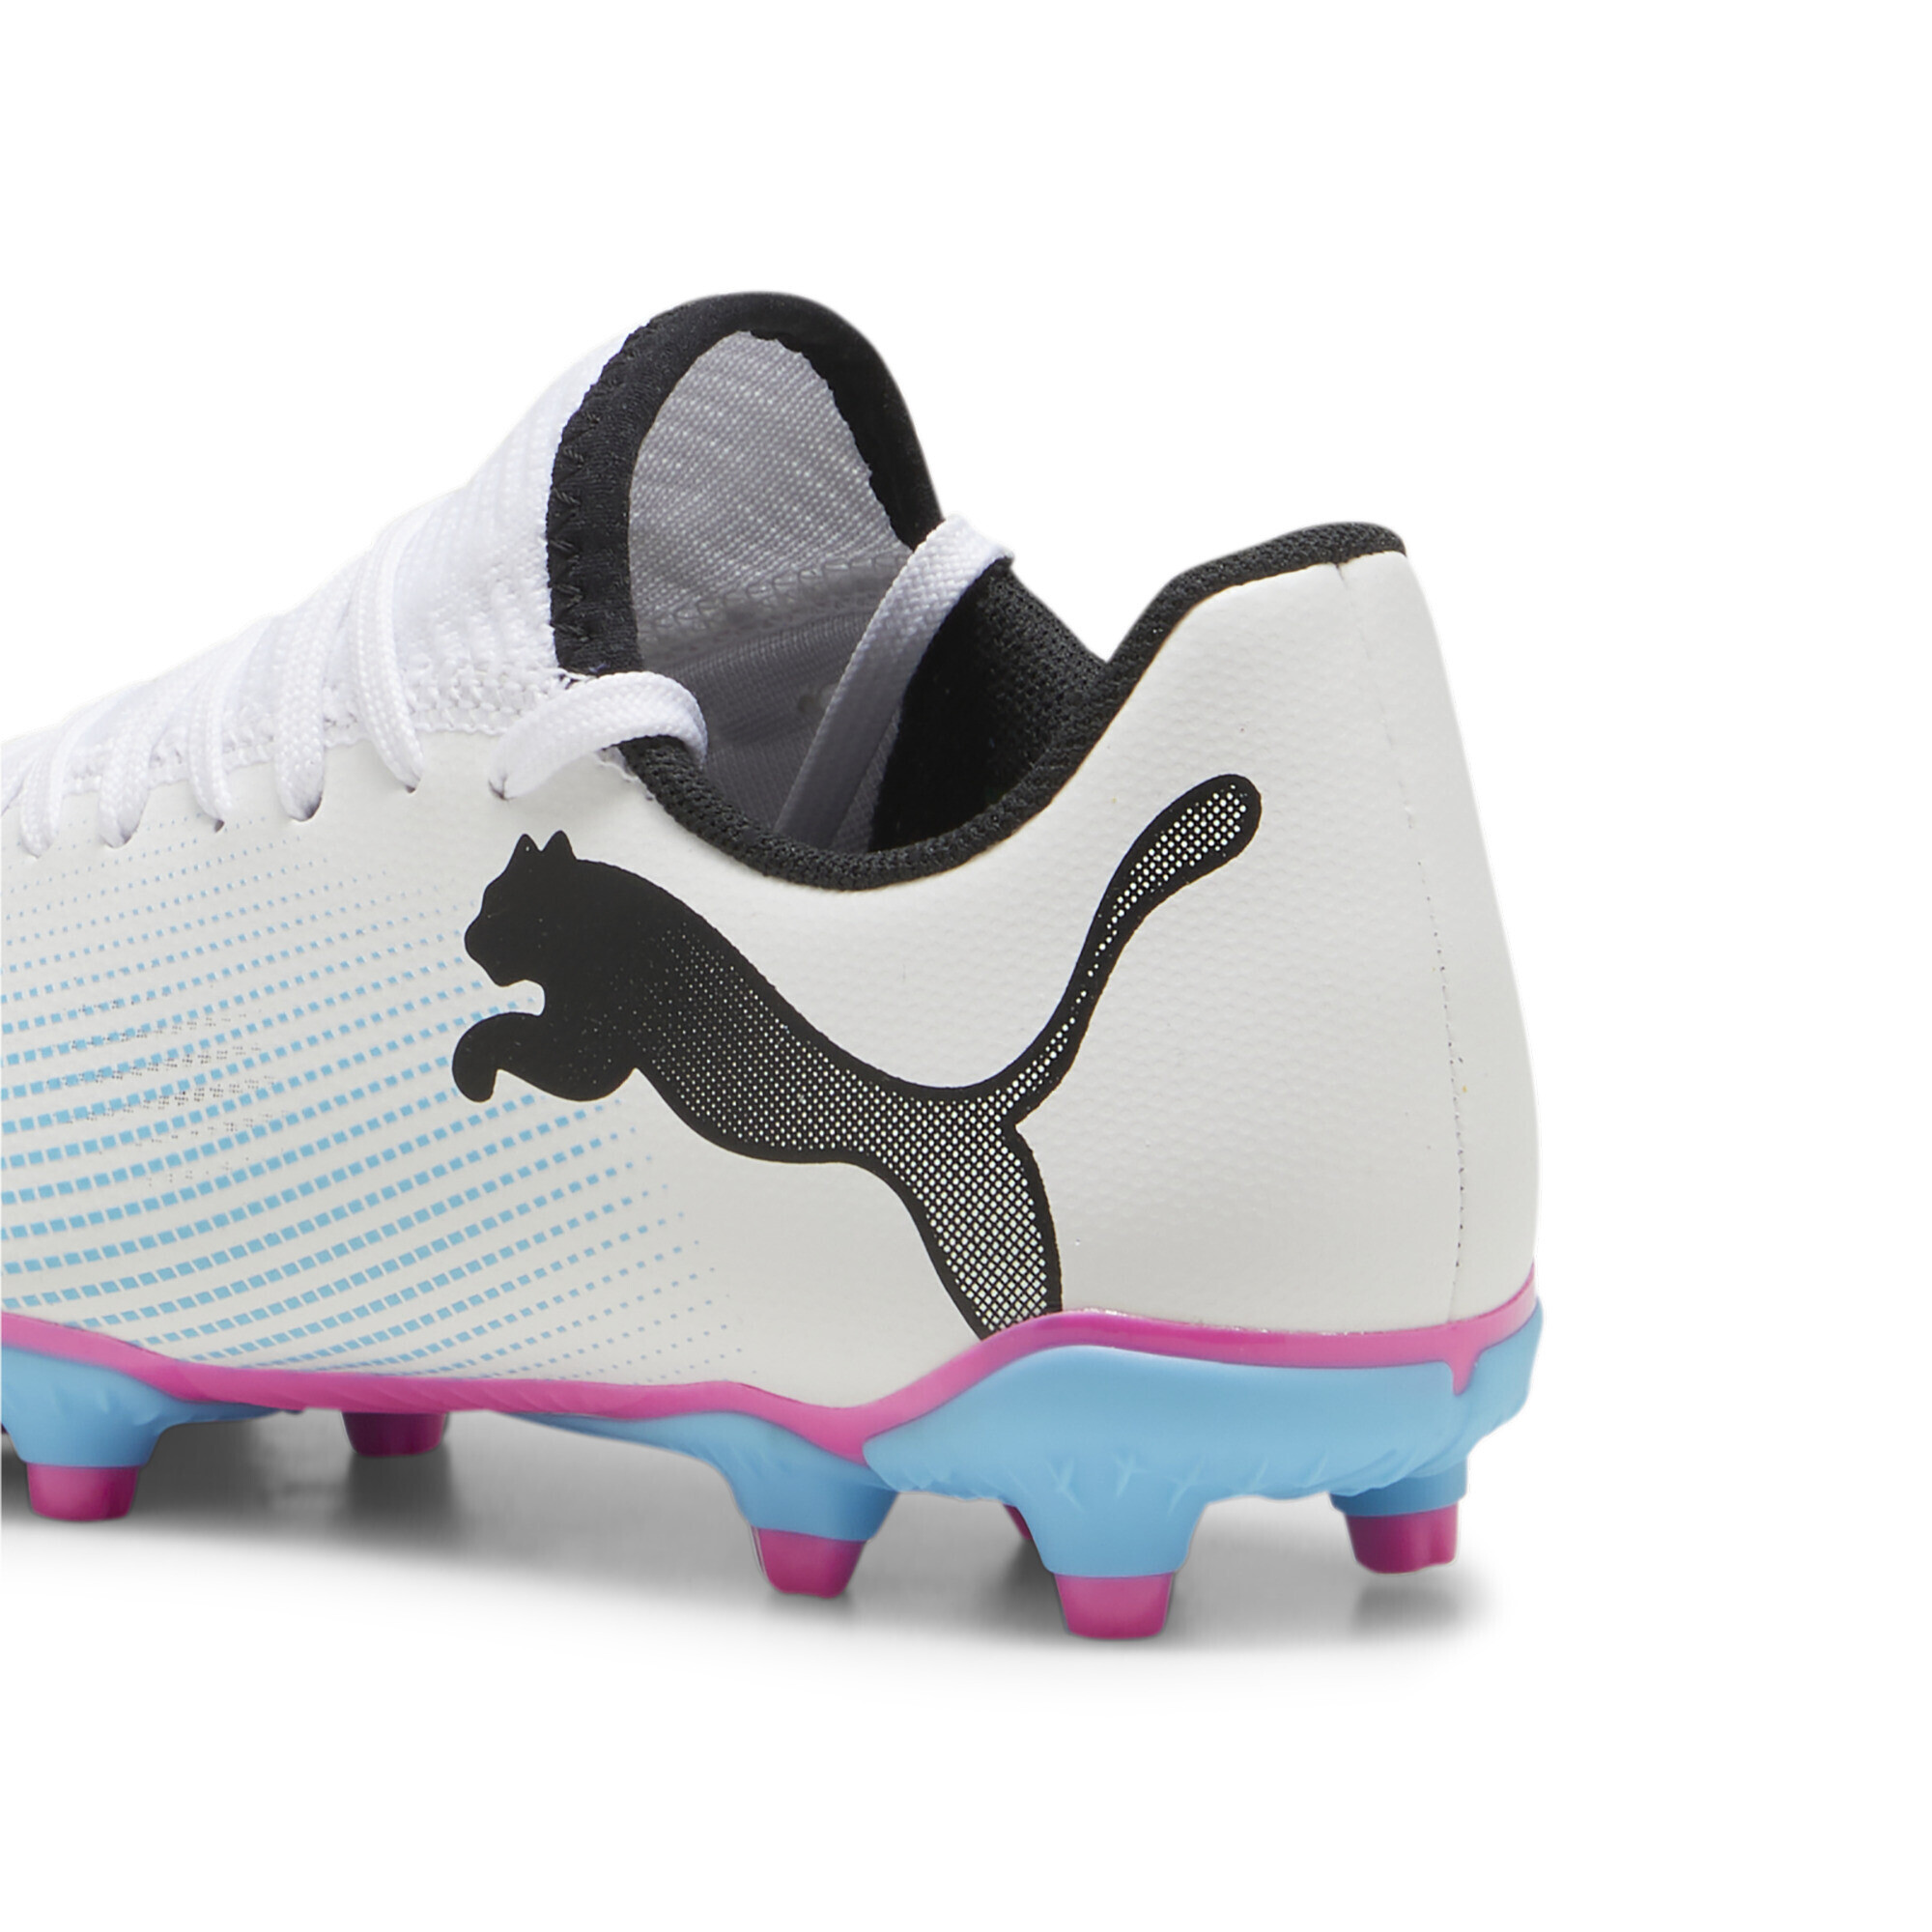 PUMA FUTURE 7 PLAY FG/AG Youth Football Boots In White/Pink, Size EU 35.5